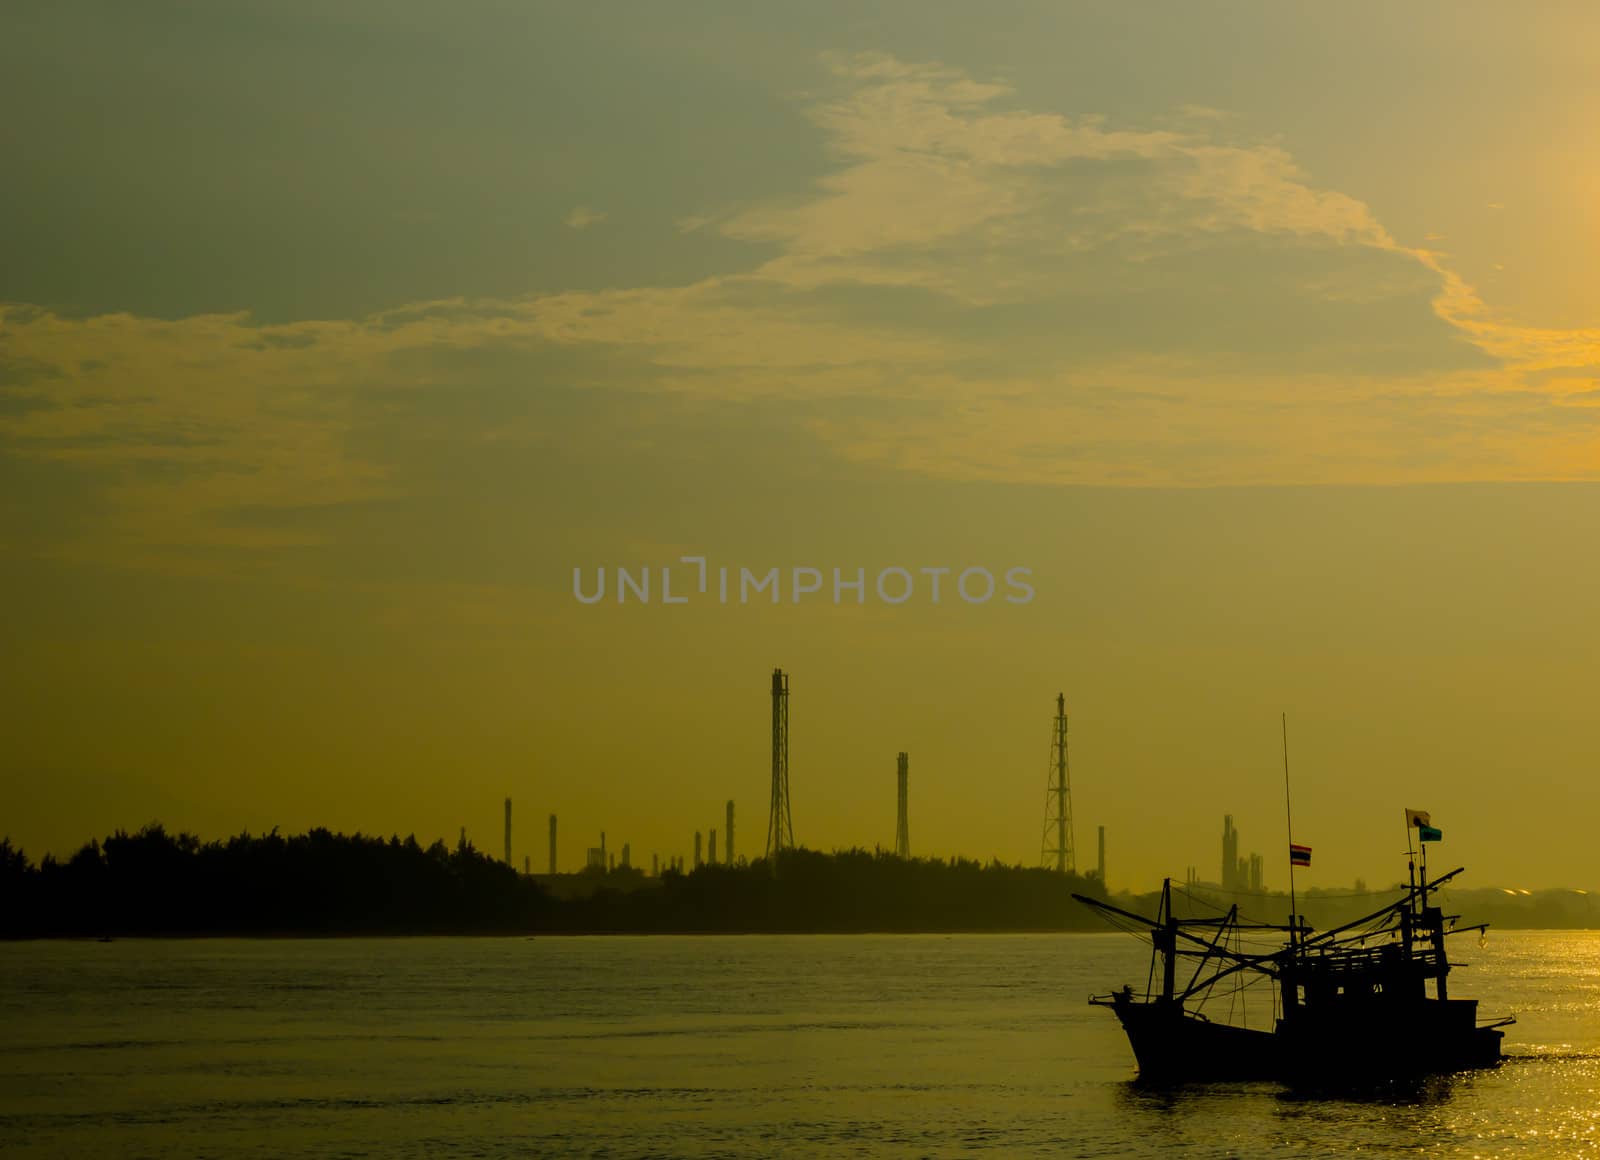 Refinery heavy industrial  effect with lifestyle of small boat fisherman